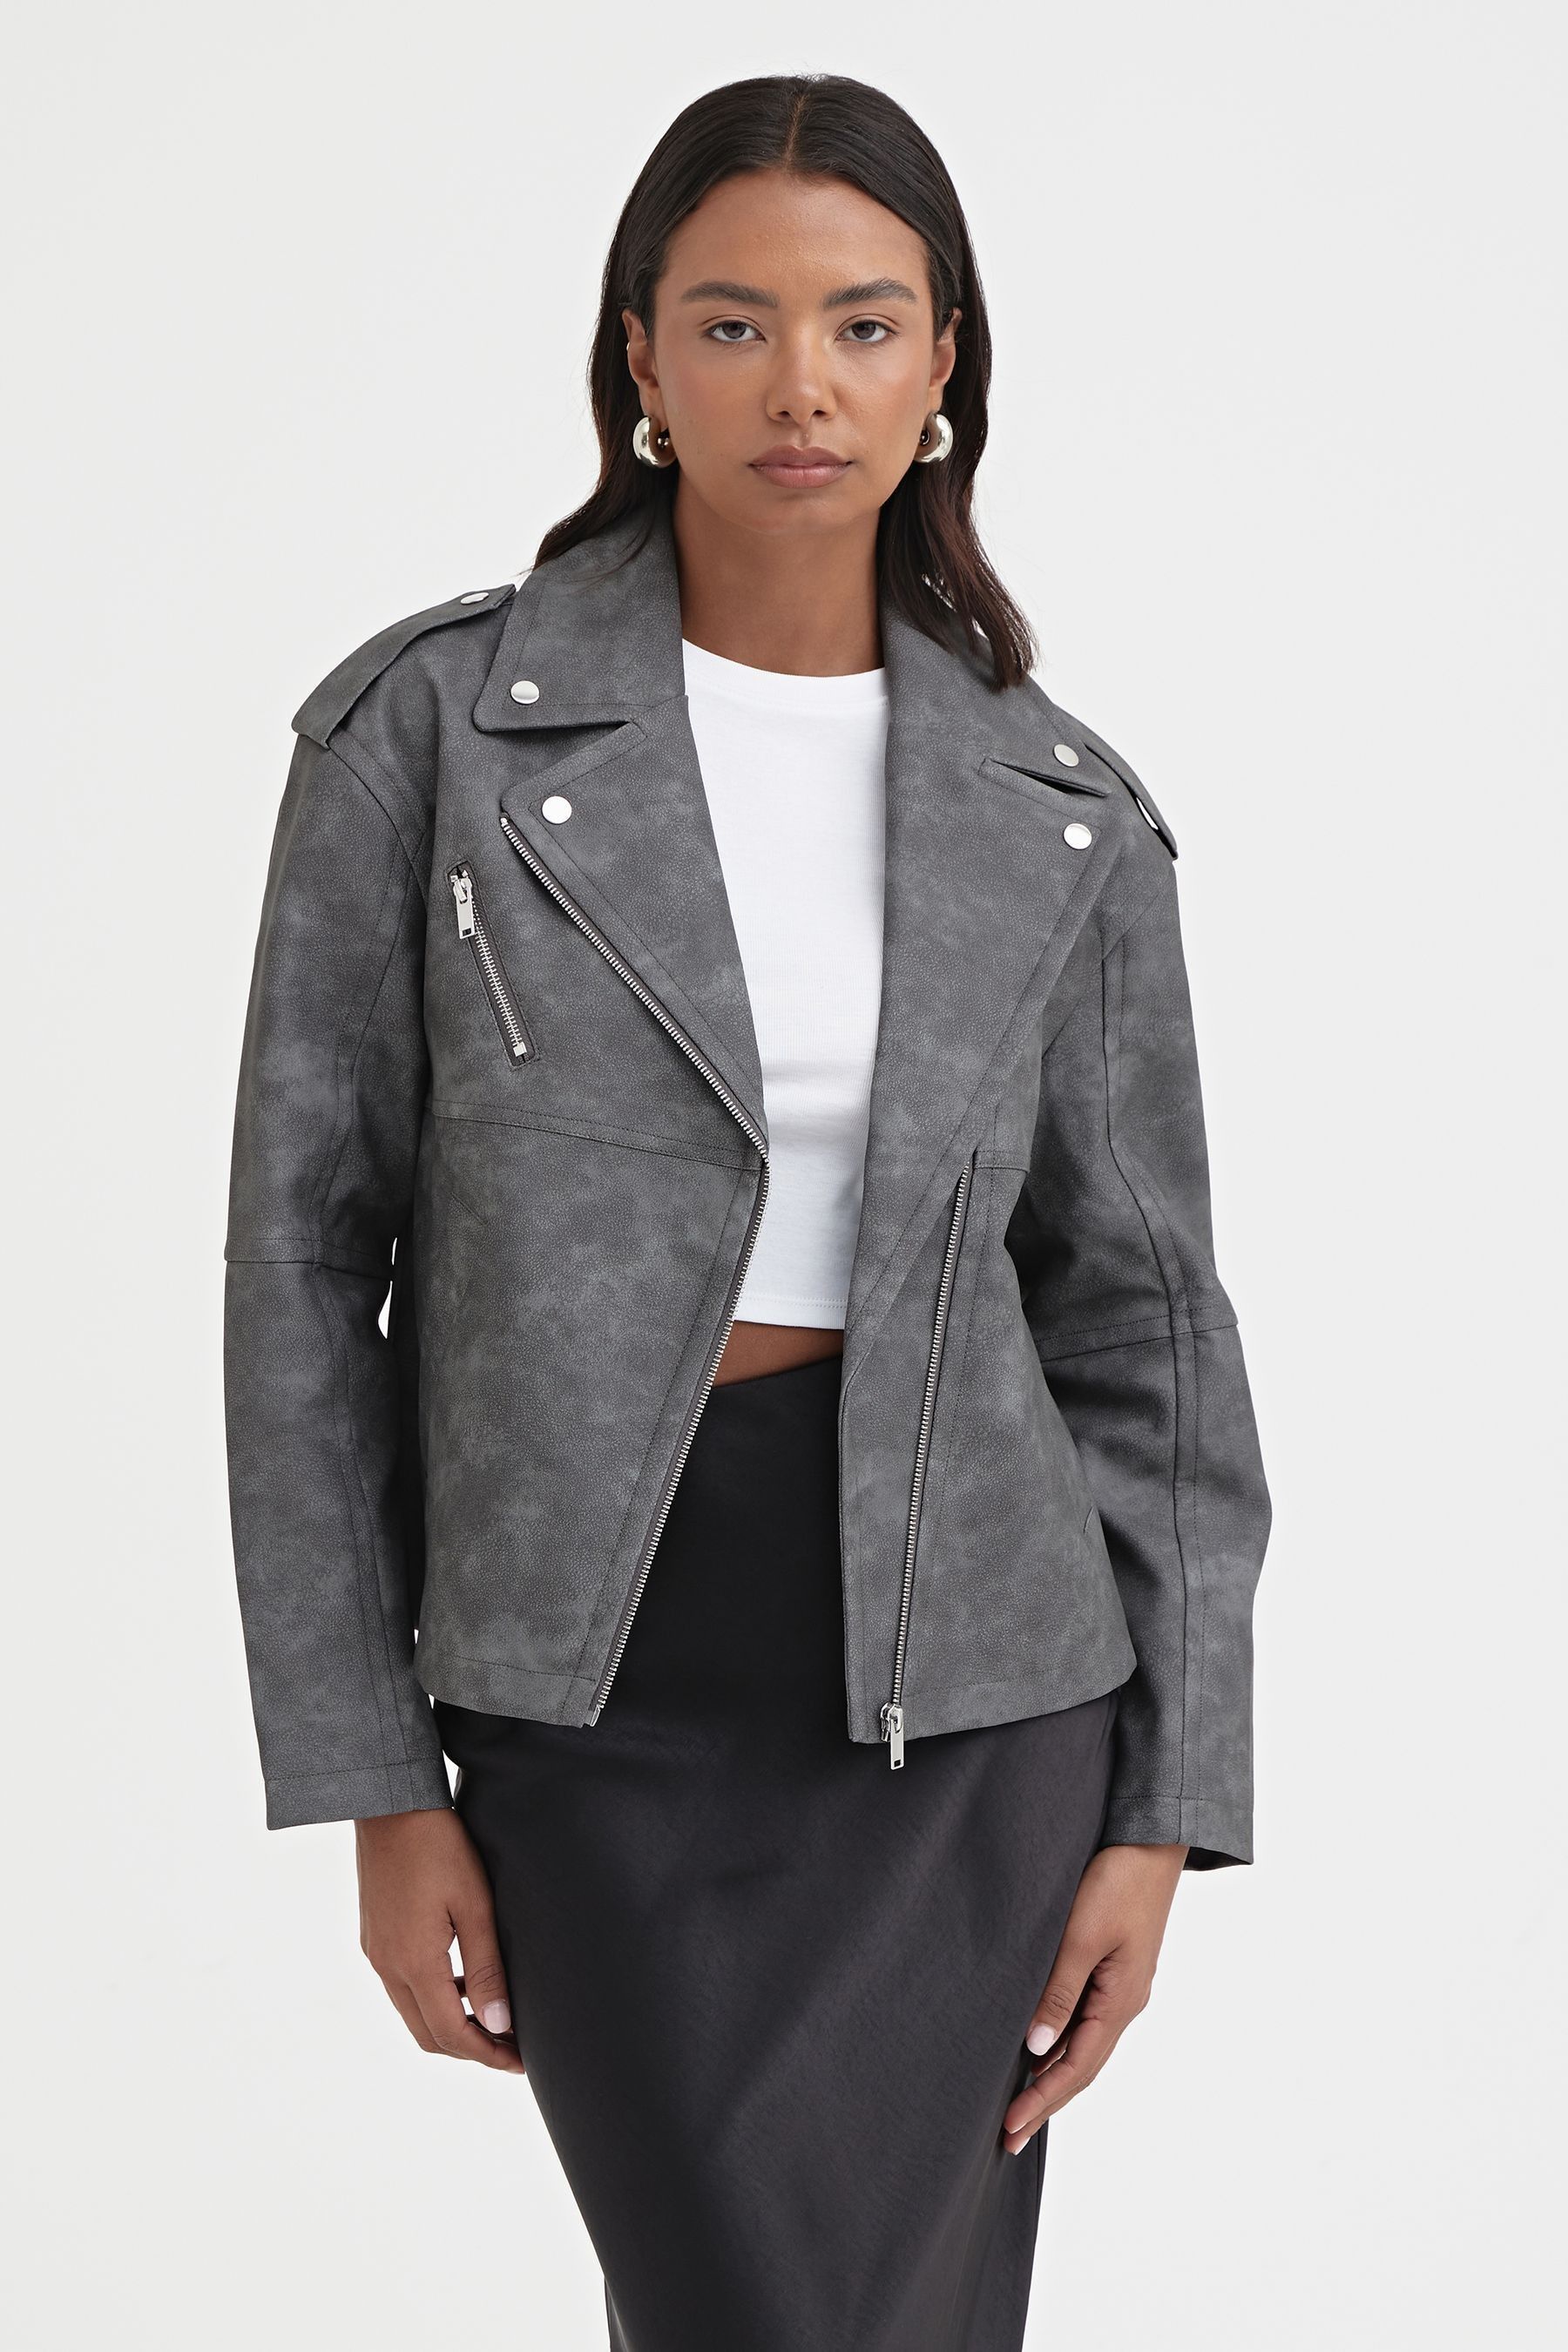 Buy 4th & Reckless Grey Moto Faux Leather Biker Jacket from the